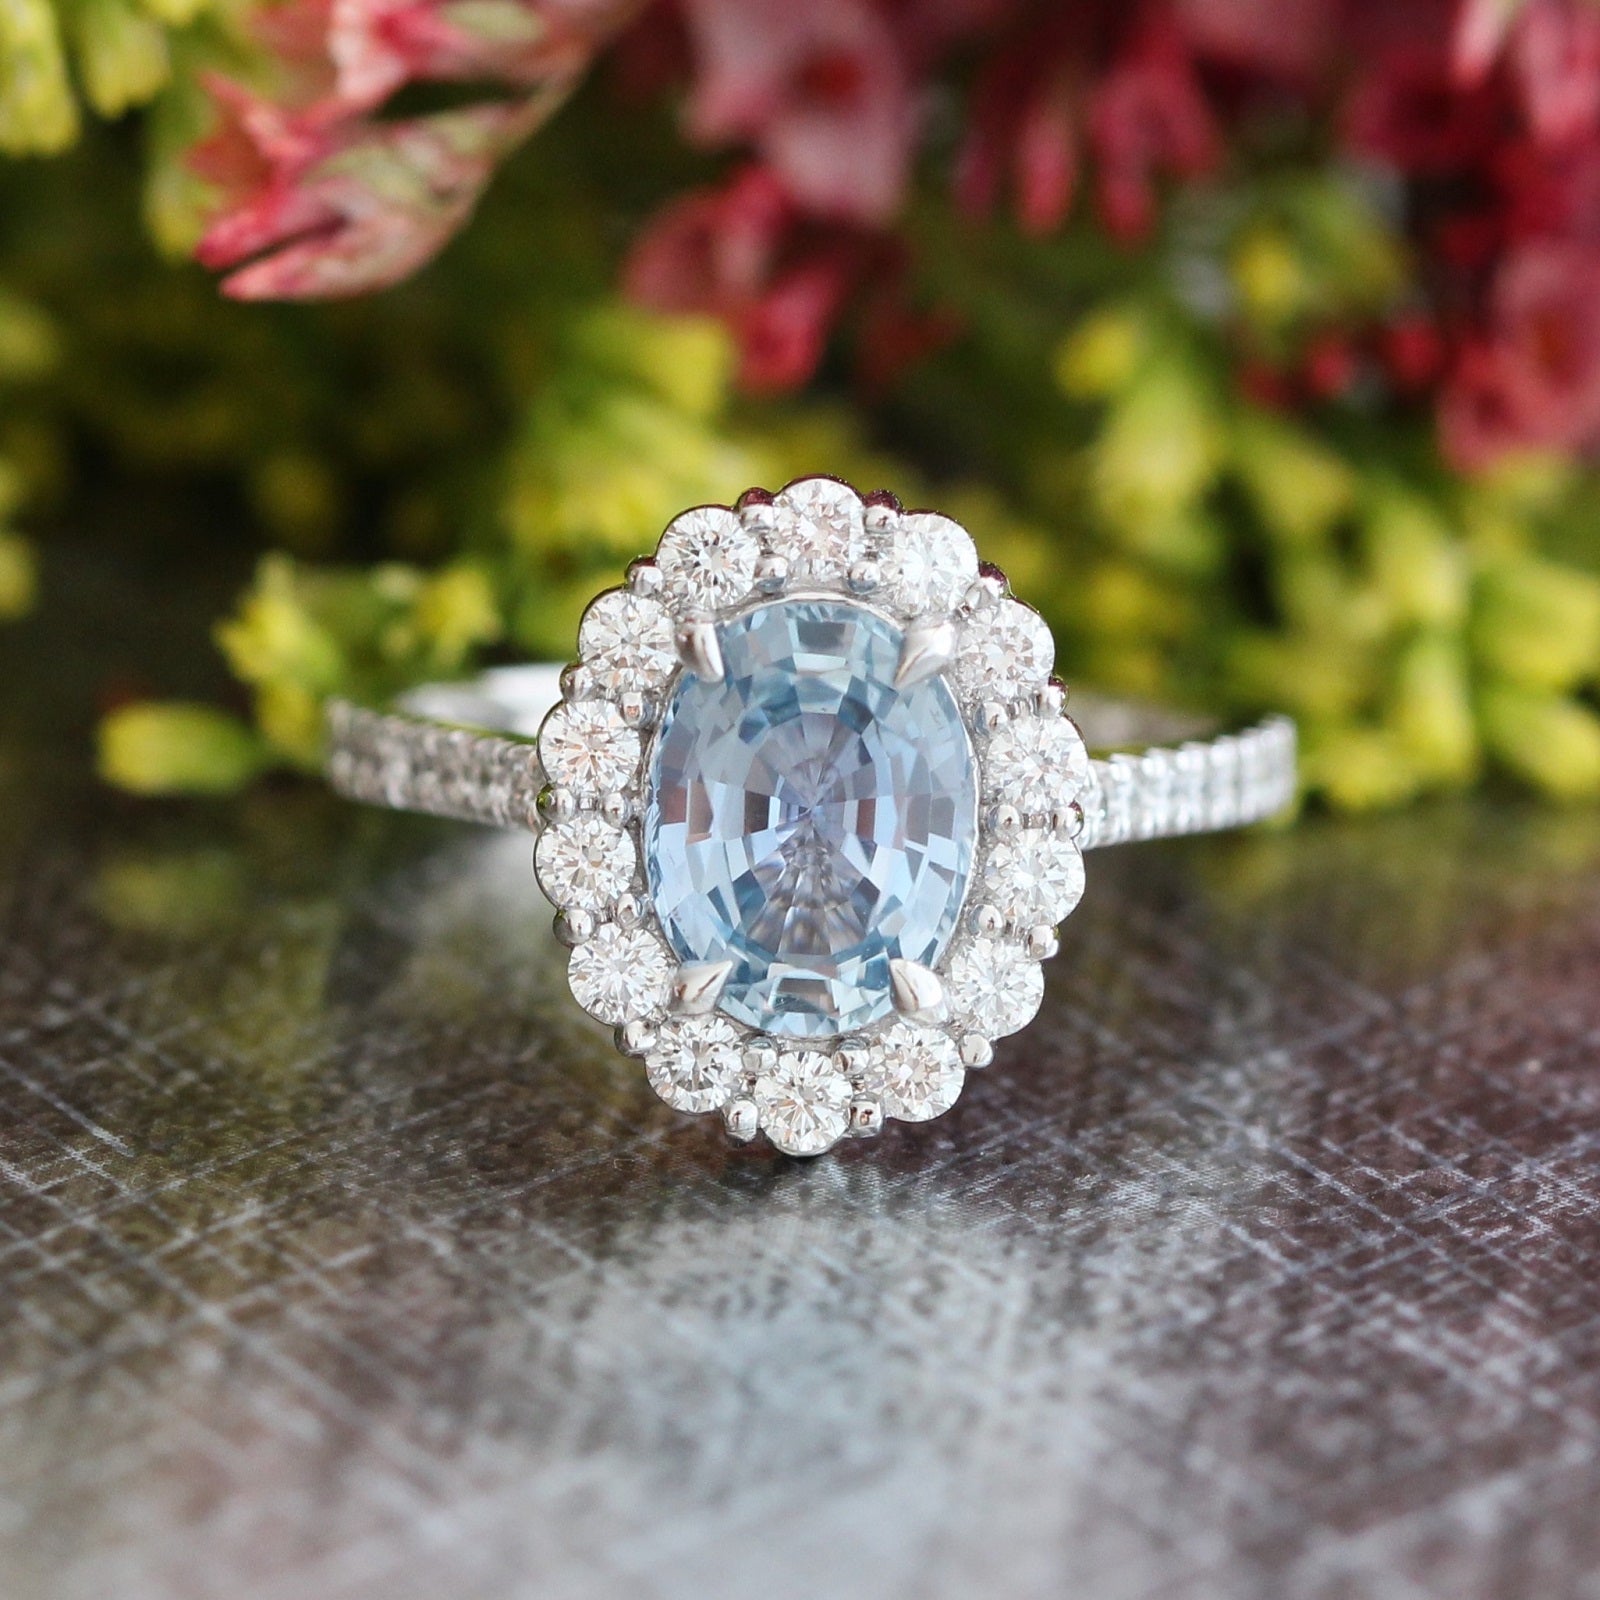 Natural aqua blue sapphire engagement ring in 14k white gold by la more design